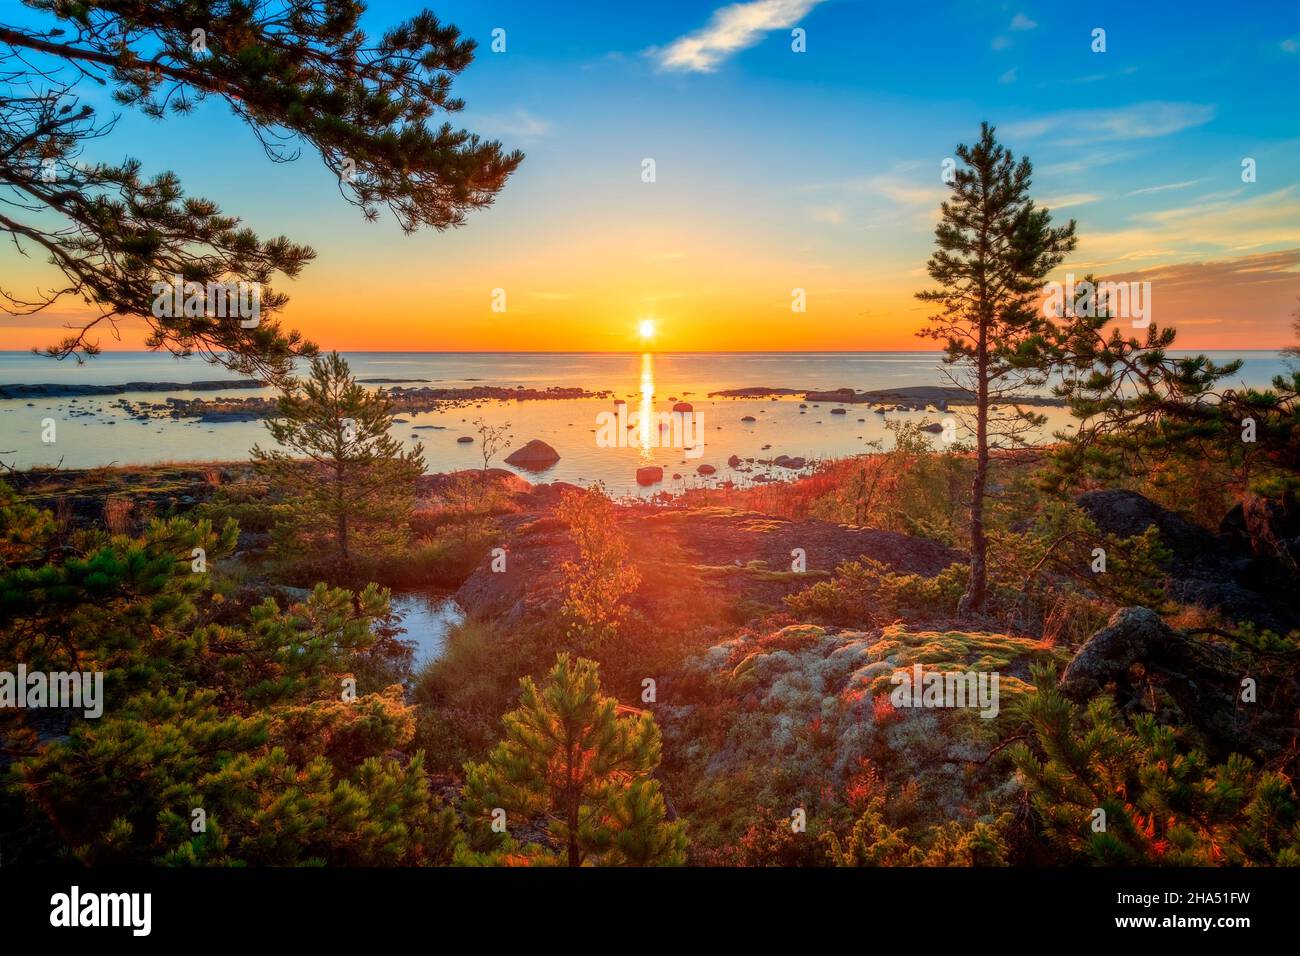 sea landscape with colorful plants with trees and rocks in ocean during sun rise Stock Photo